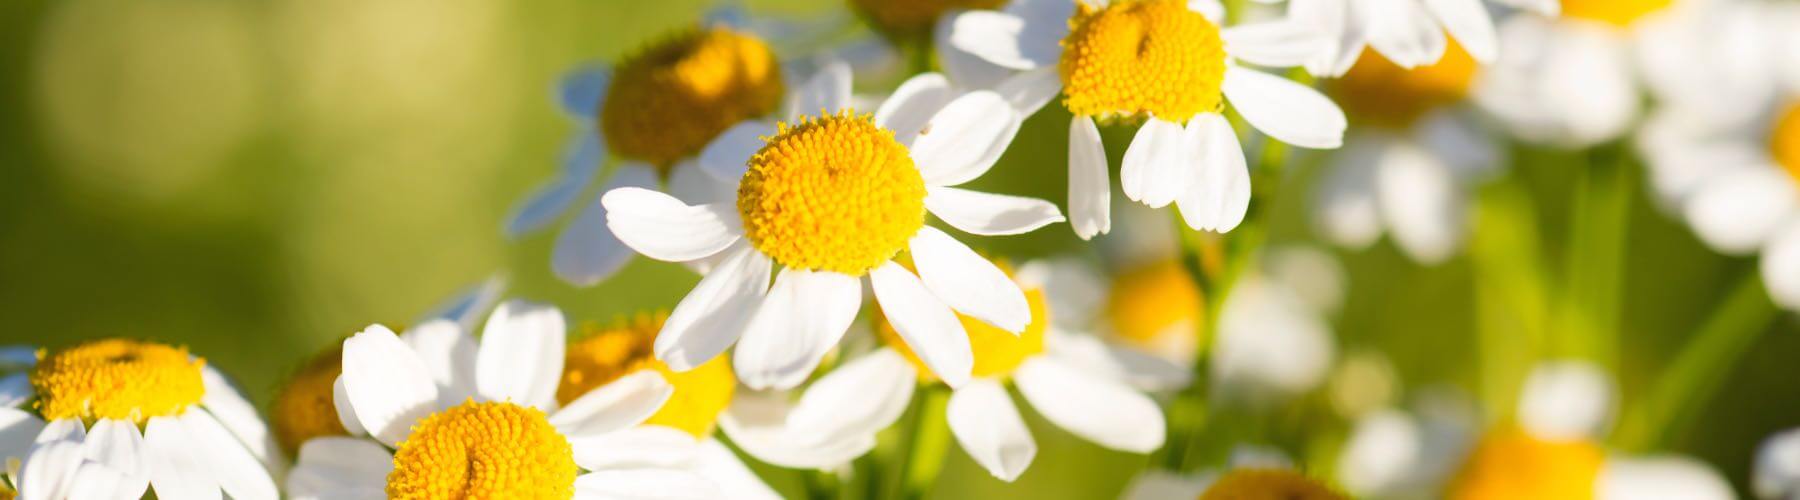 Chamomile Flowers, Soap Making Supplies, Also for Herbal Extracts,  Tinctures, Teas, Salves, Creams, Lotions or Lip Balms. 